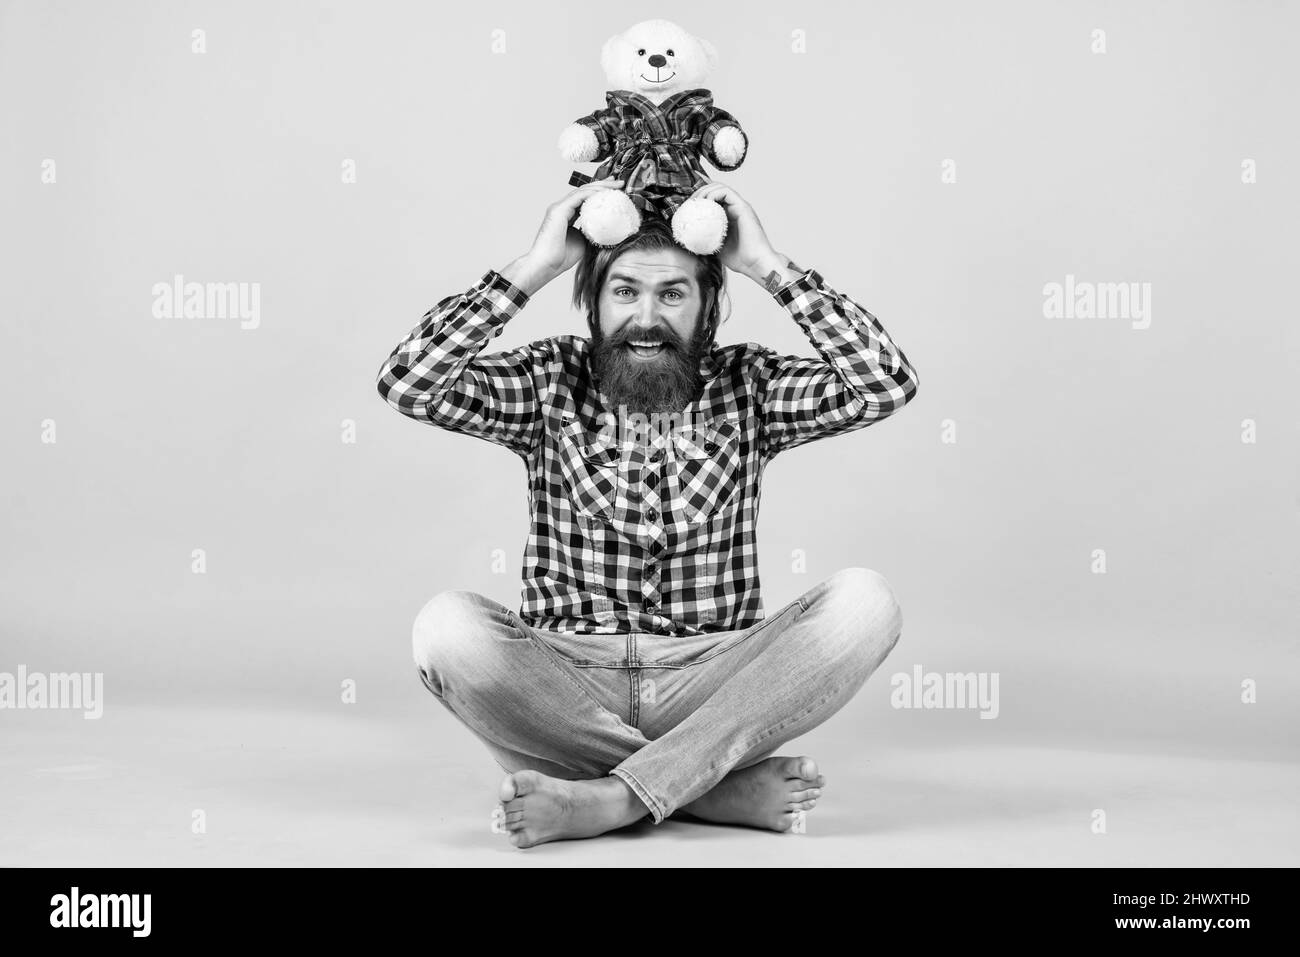 Caucasian mature hipster with trendy hairstyle in checkered shirt hold teddy bear toy, fun Stock Photo